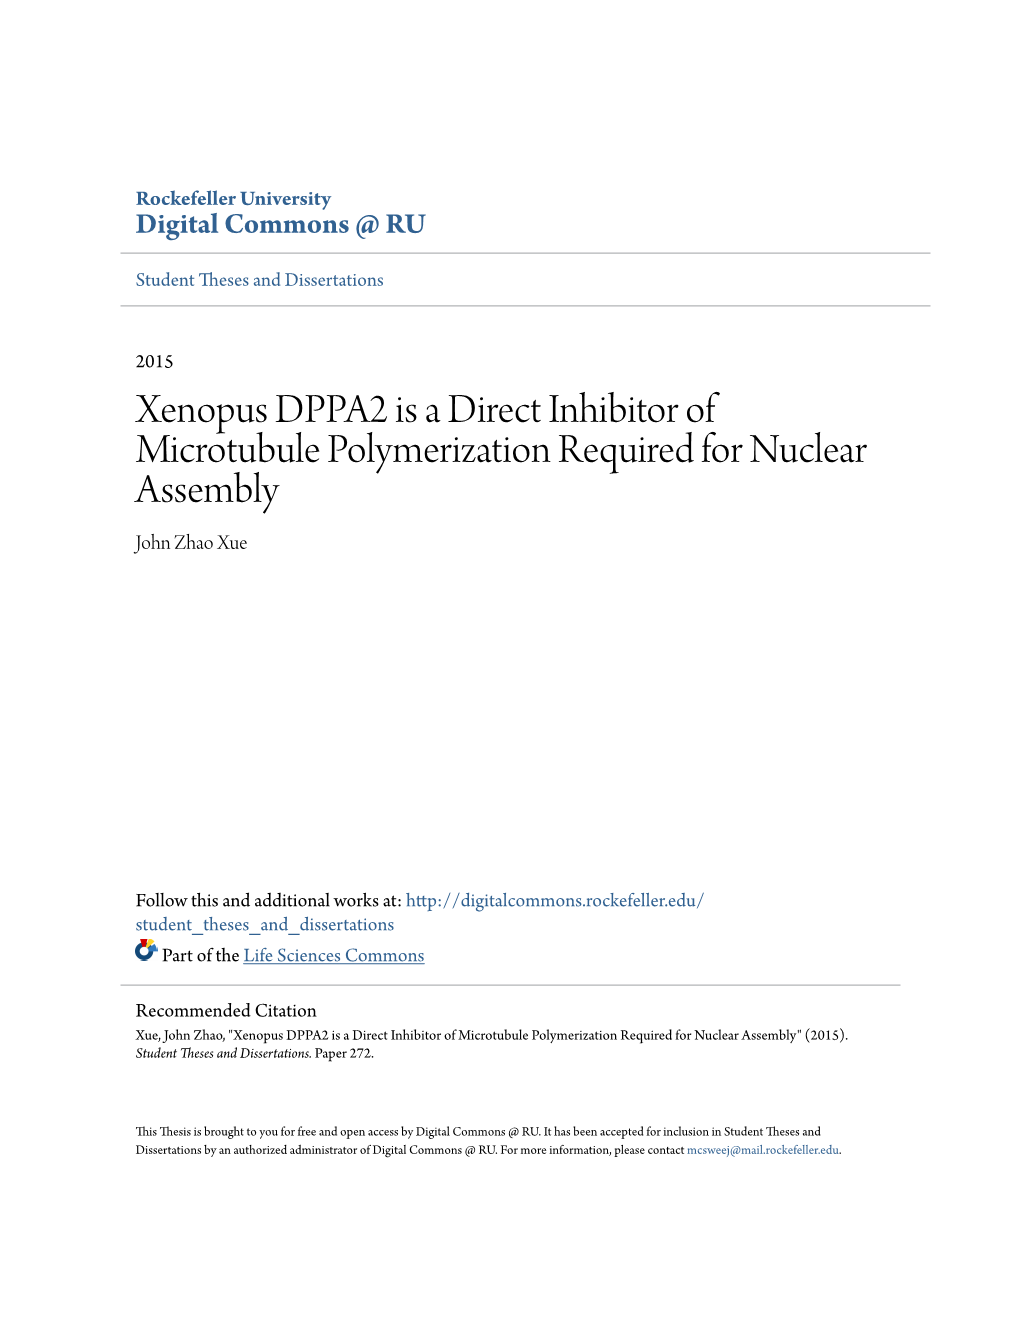 Xenopus DPPA2 Is a Direct Inhibitor of Microtubule Polymerization Required for Nuclear Assembly John Zhao Xue